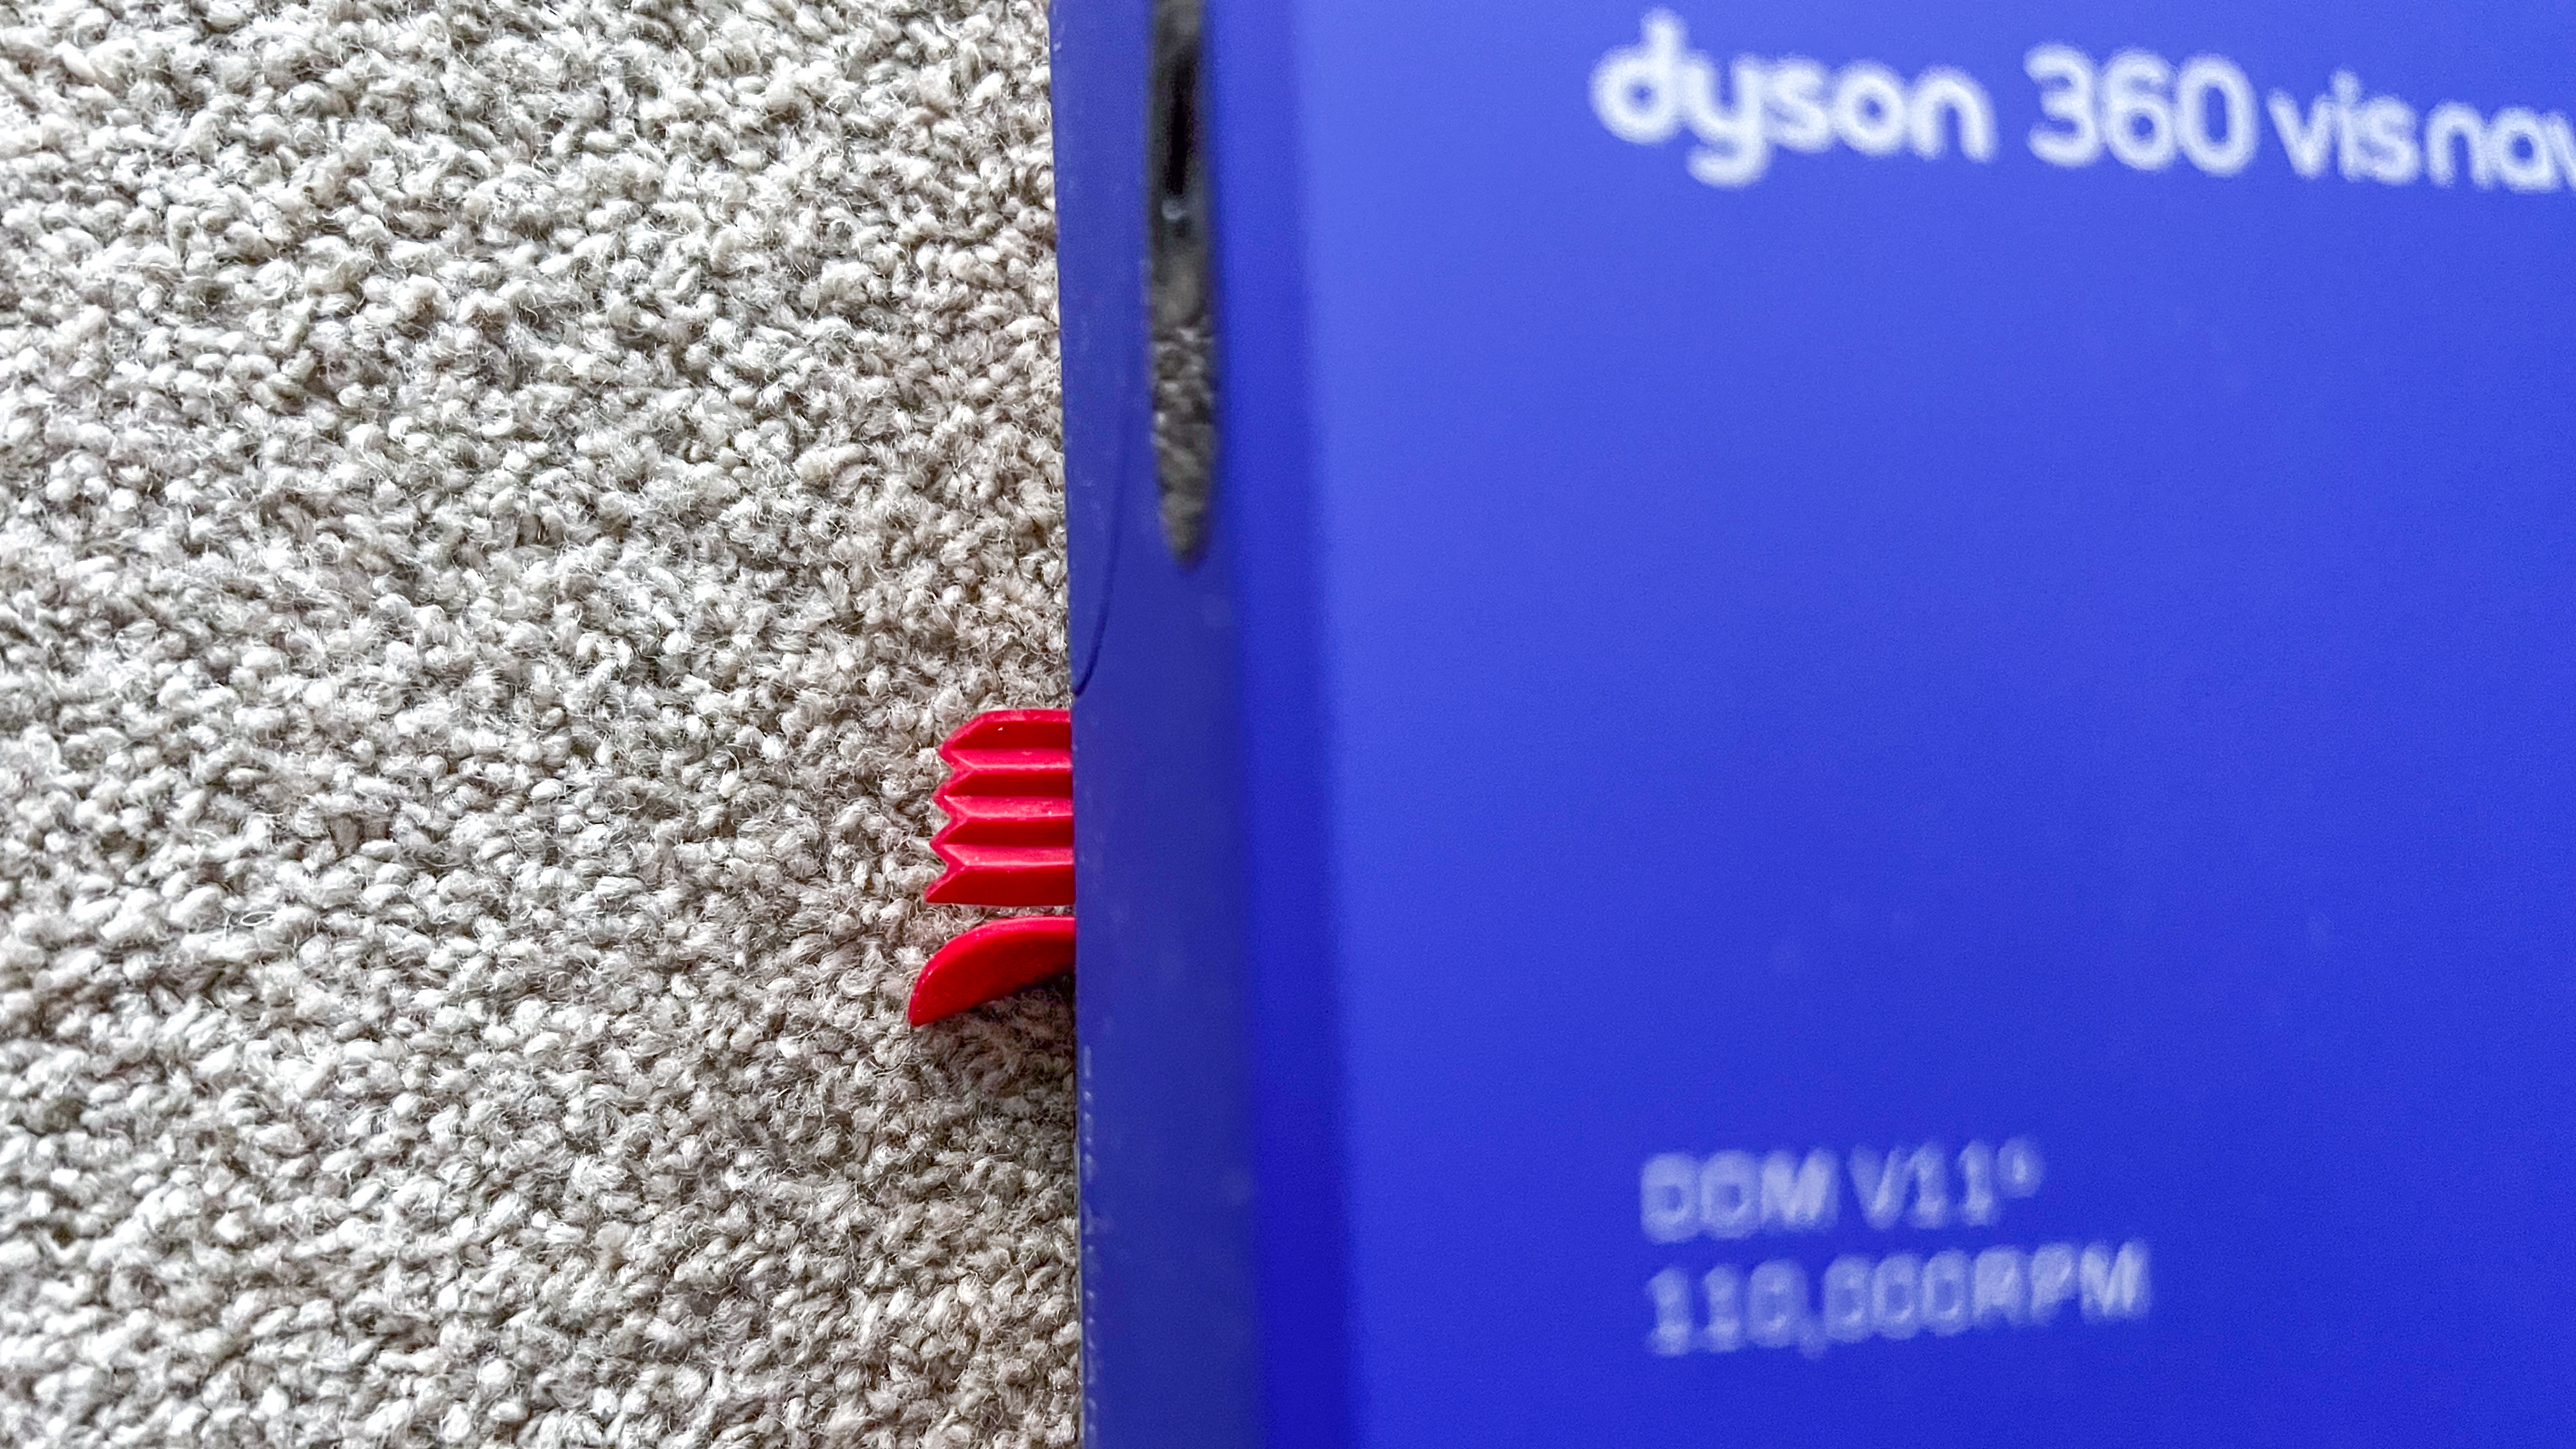 The side duct for edge cleaning on the Dyson 360 Vis Nav